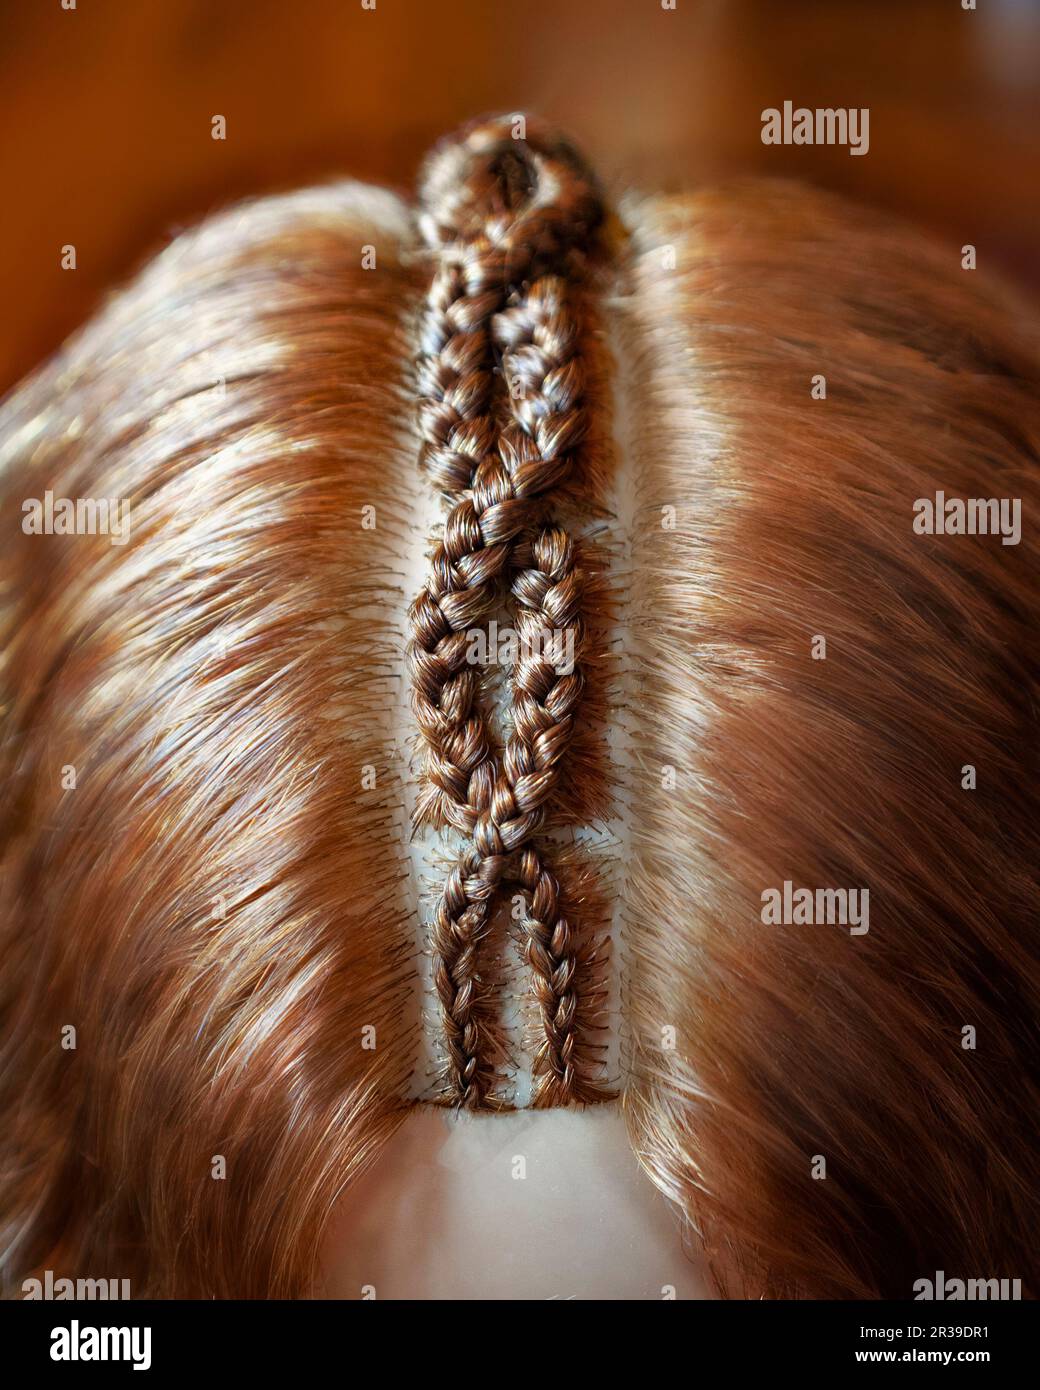 Drawings made of hair, braids texture, close-up background of hair Stock Photo